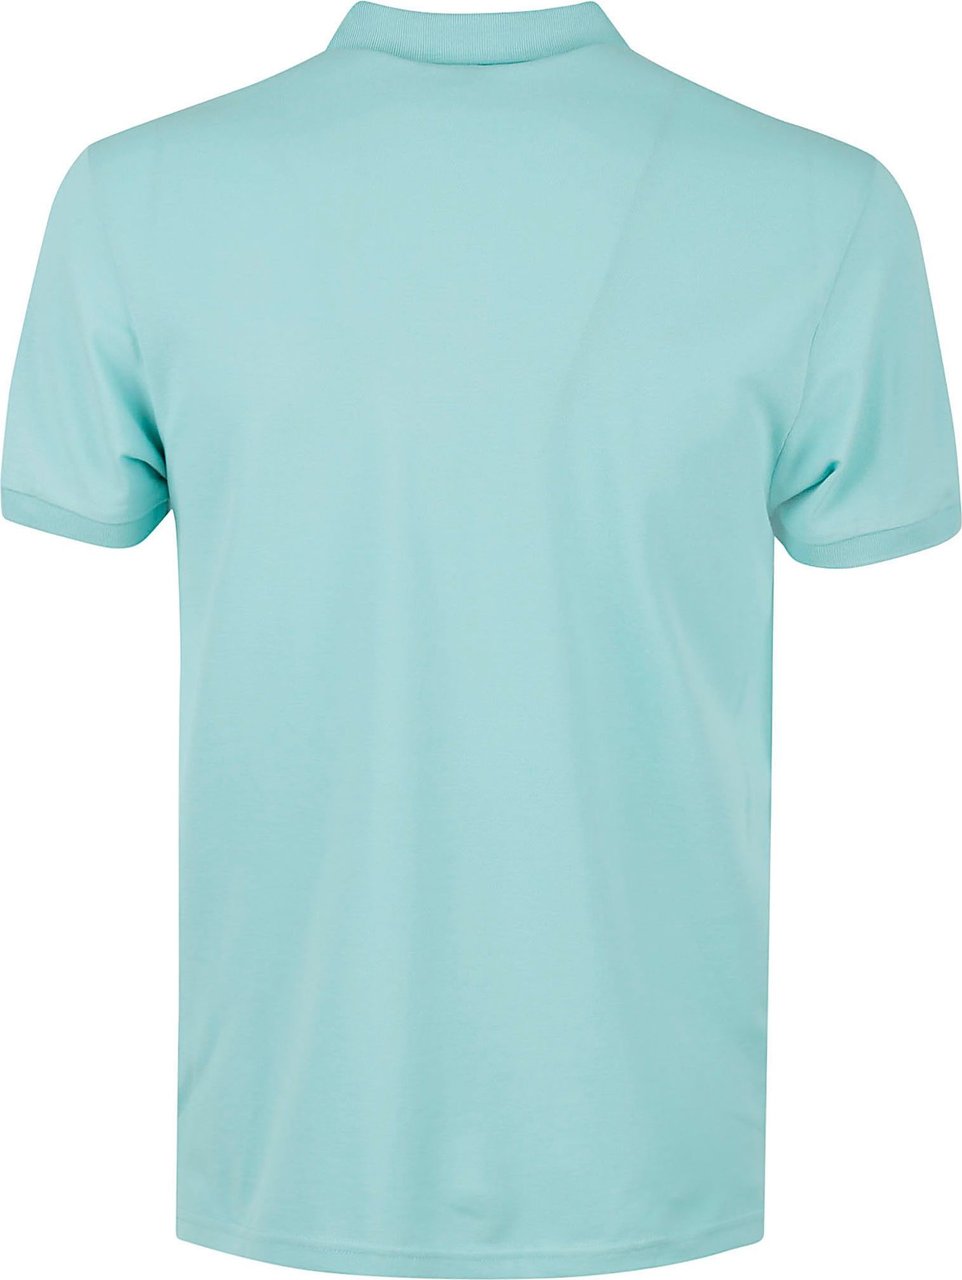 Colmar Originals T-shirts And Polos Turquoise Divers Divers